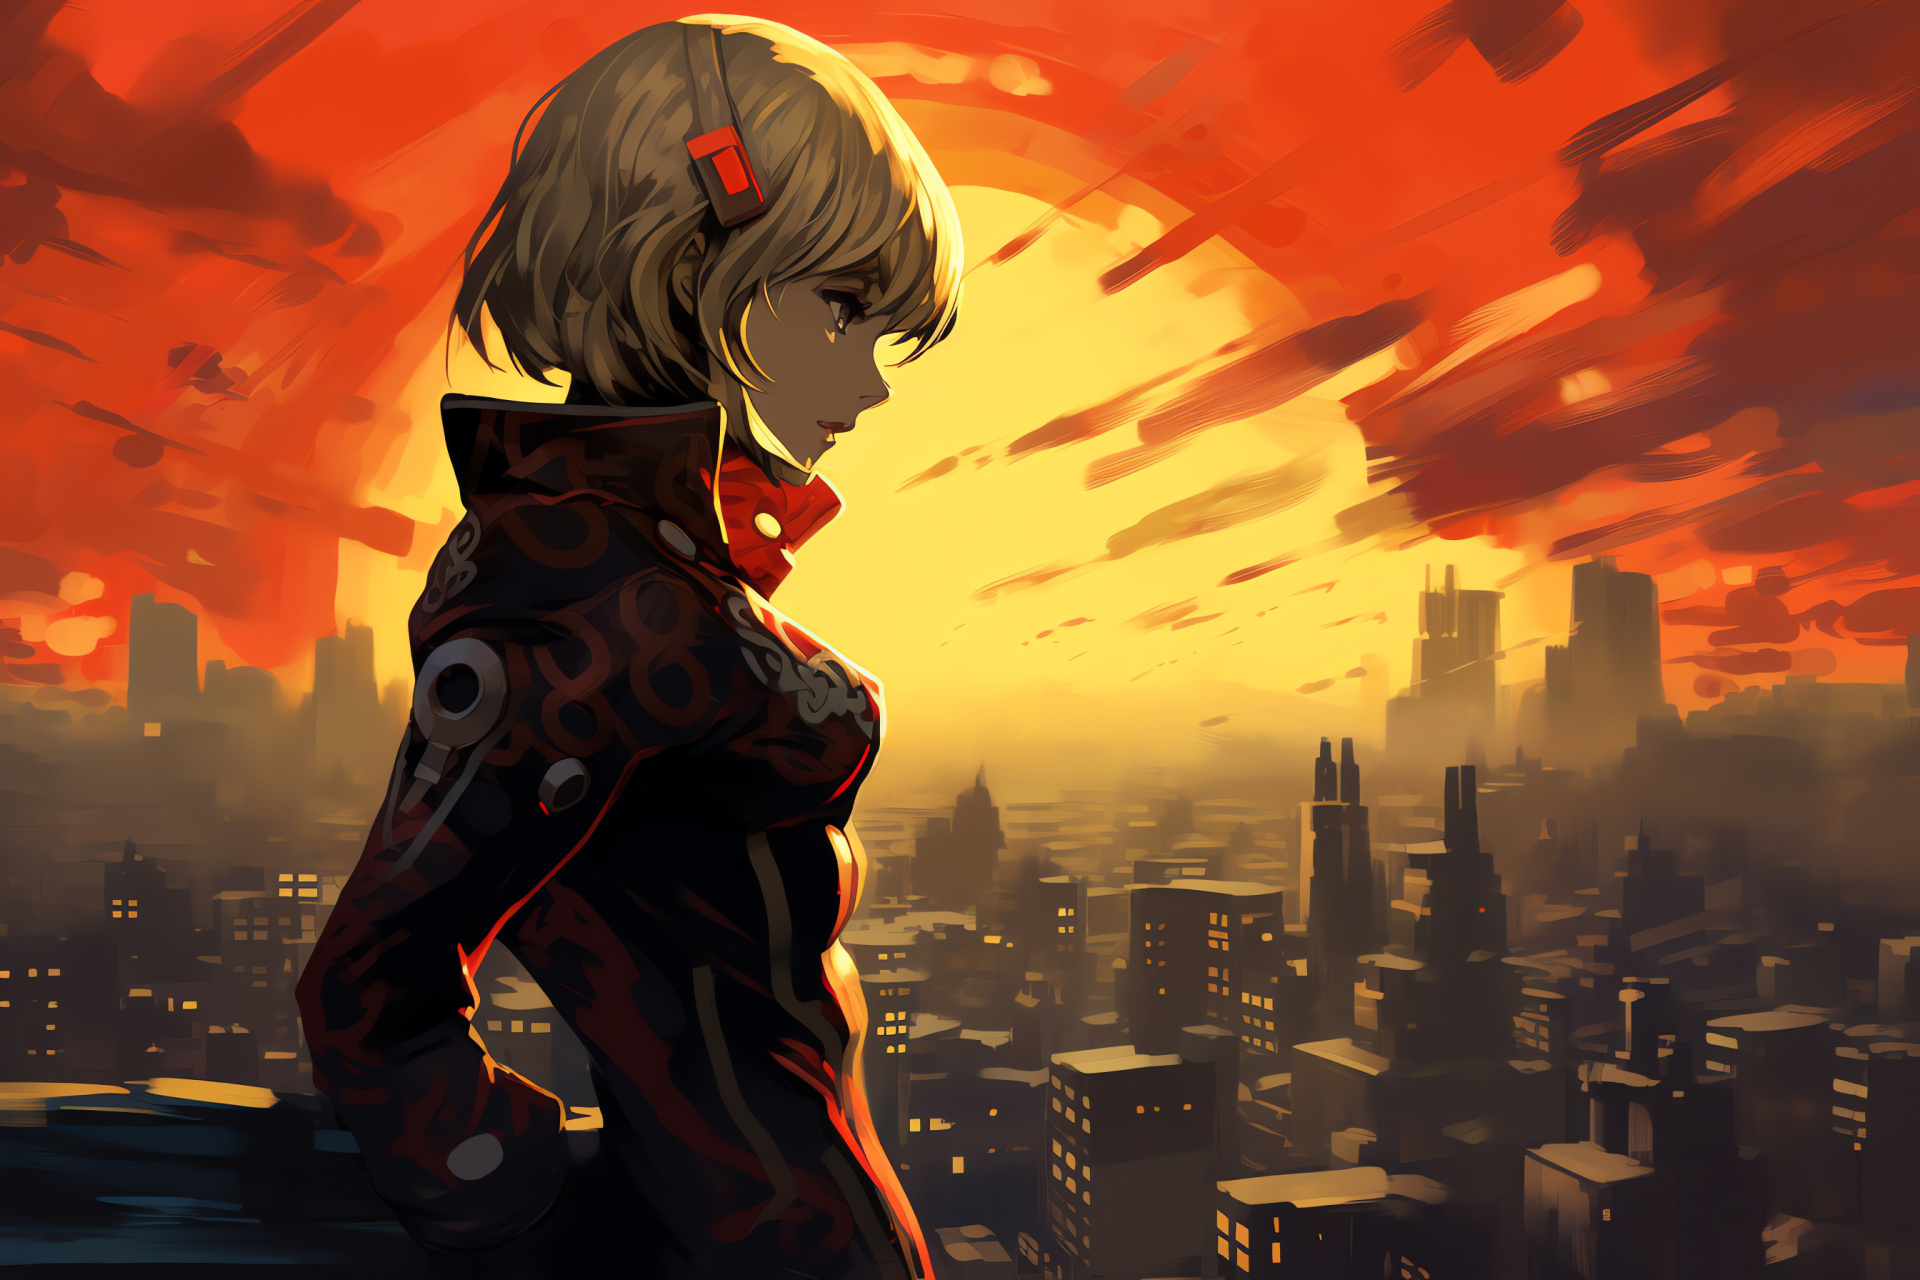 Persona 3 setting Aigis, City panorama, Skyscape shades, Rooftop perspective, Eventide glow, HD Desktop Image